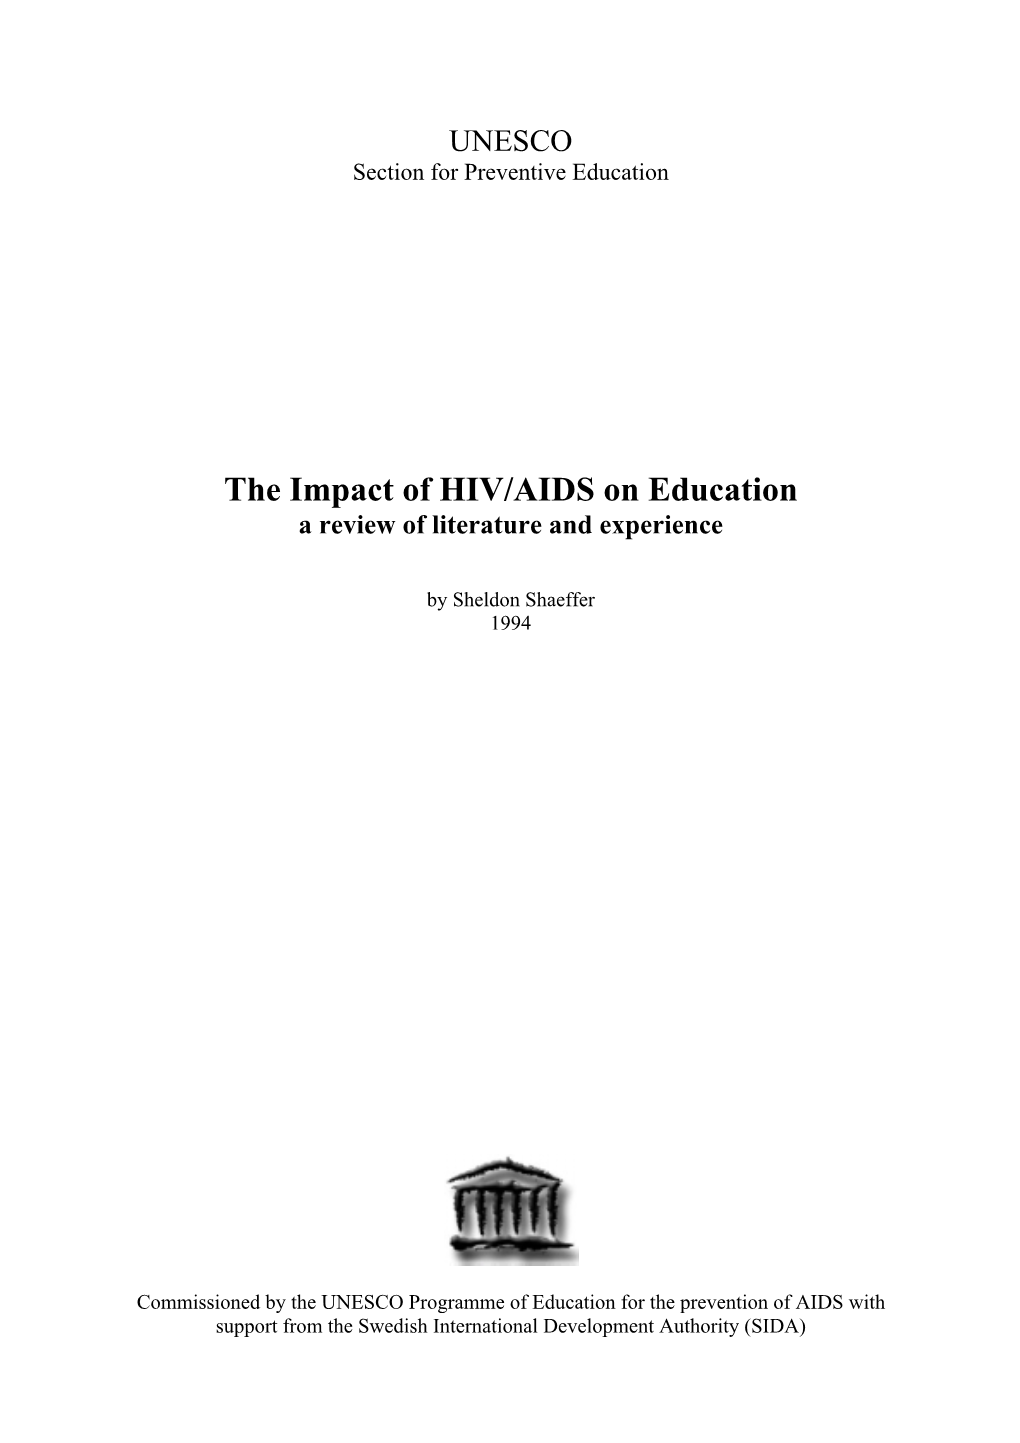 The Impact of HIV/AIDS on Education a Review of Literature and Experience